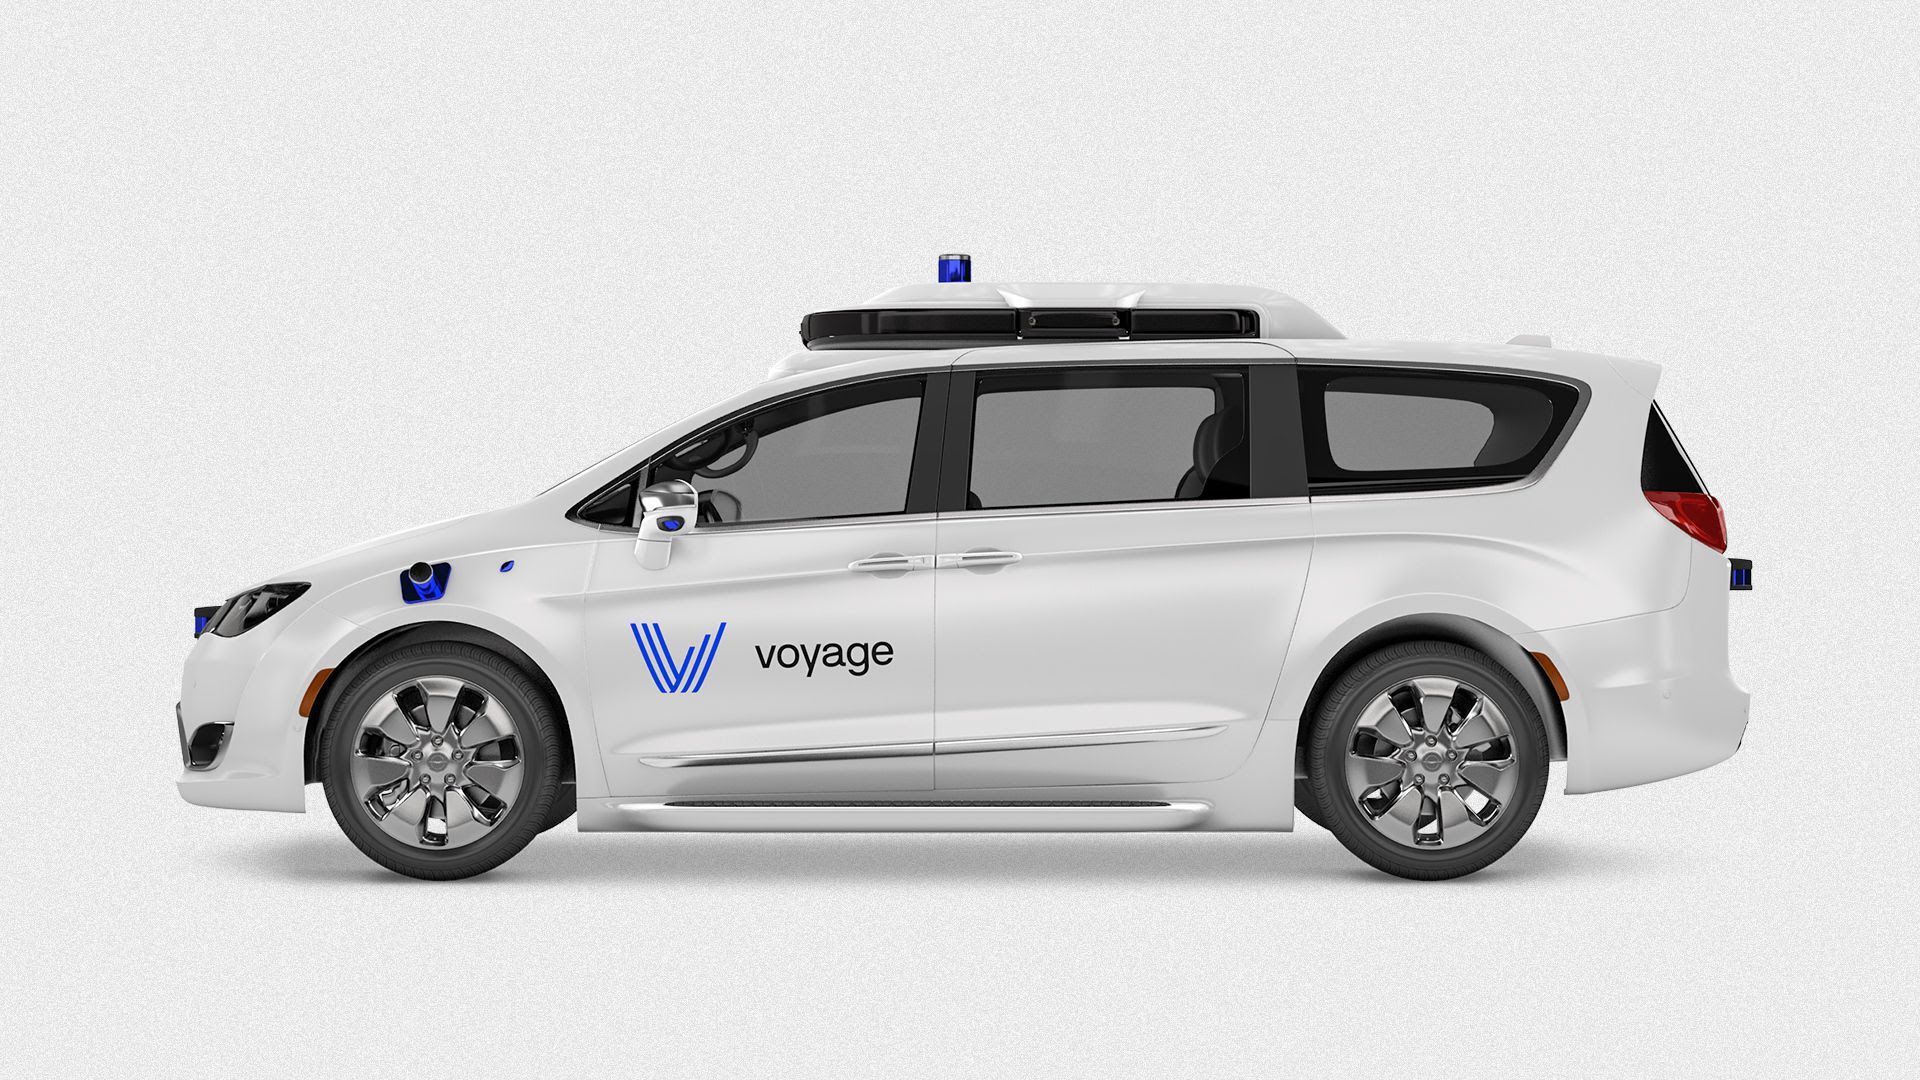 Voyage's latest robotaxi prototype, a specially outfitted Chrysler Pacifica minivan.